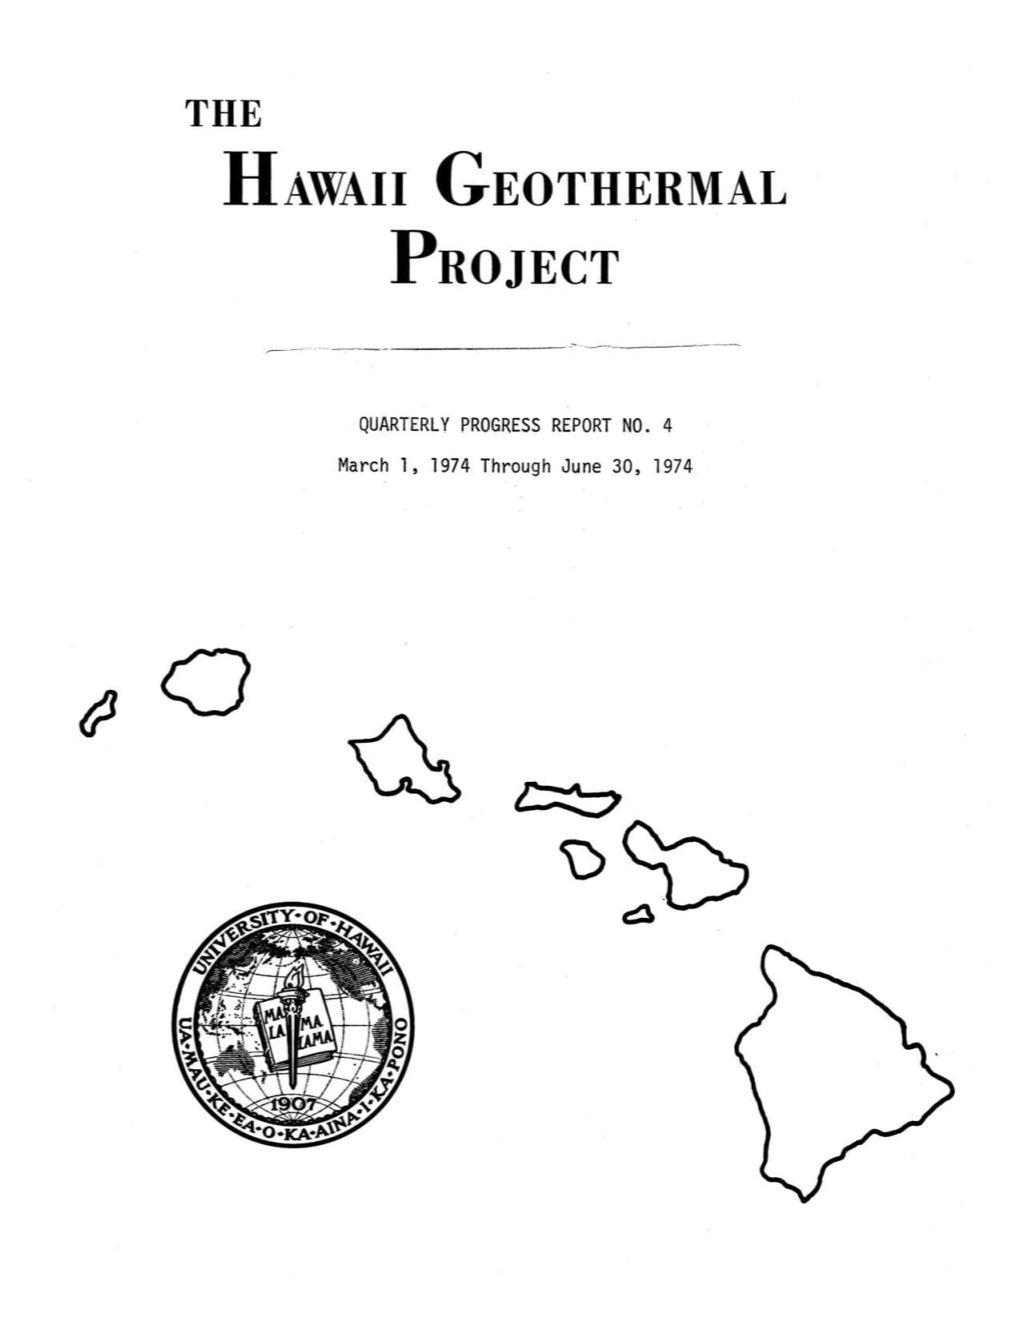 Hawaii Geothermal Project